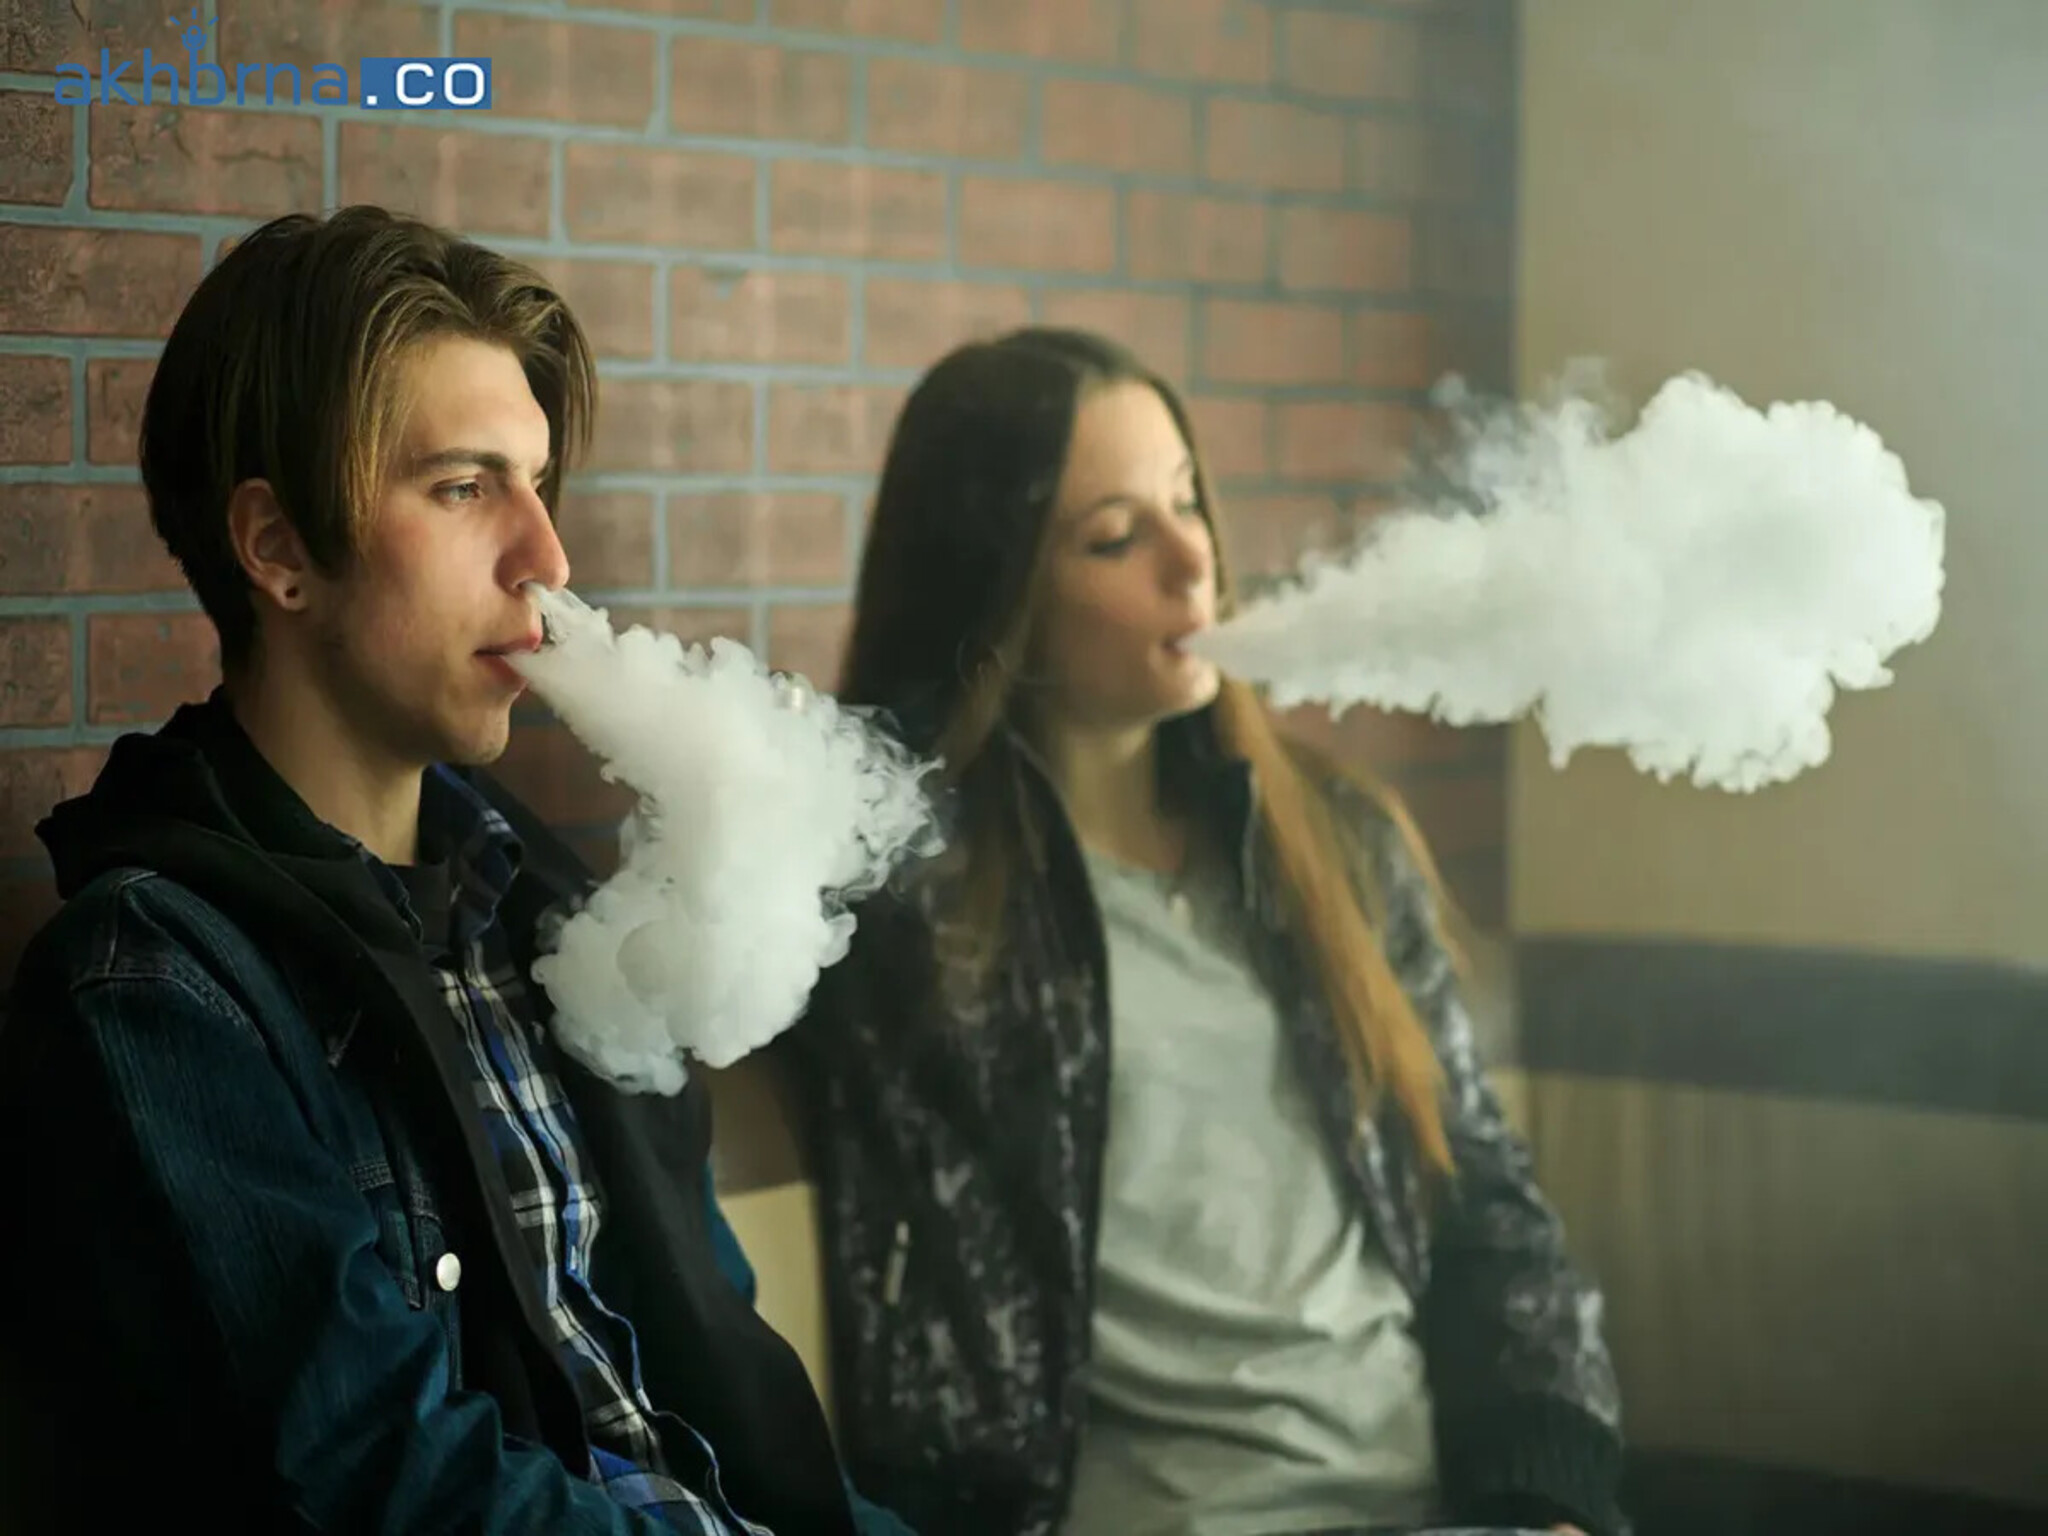 UAE Doctors Caution Against Teen Vaping to "Beat School Stress" & Addiction risk